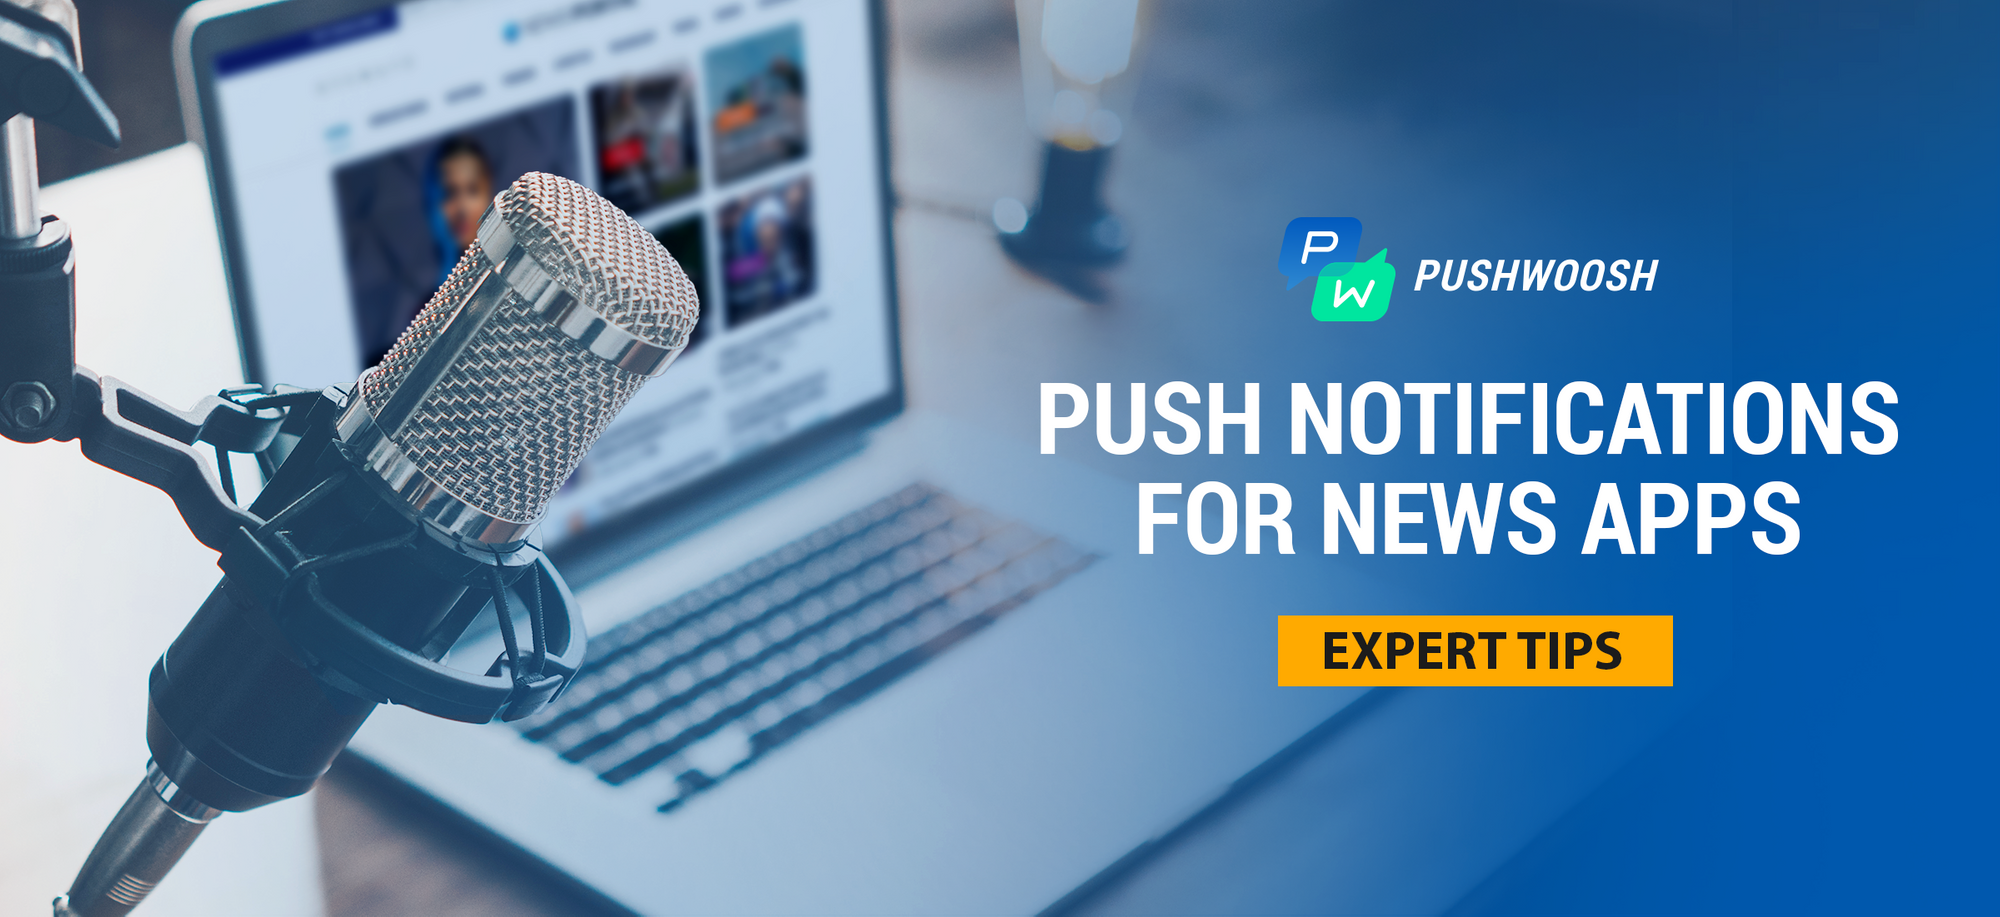 Expert Tips for Sending Push Notifications from a News App